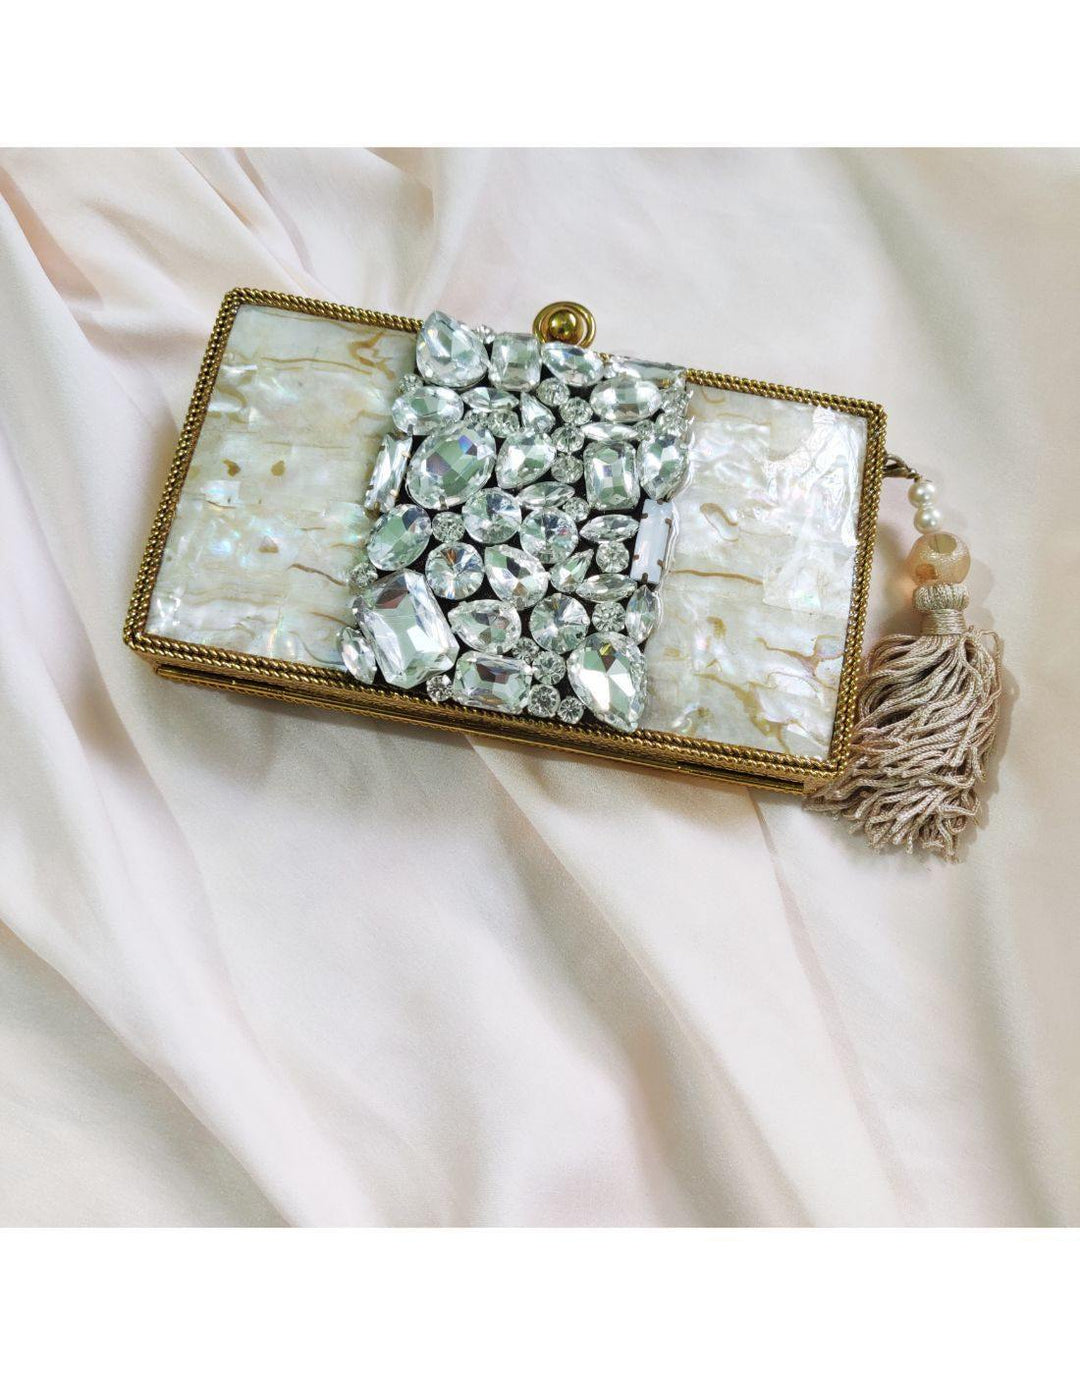 Mother of Pearl Clutch-Clutch-Glamourental